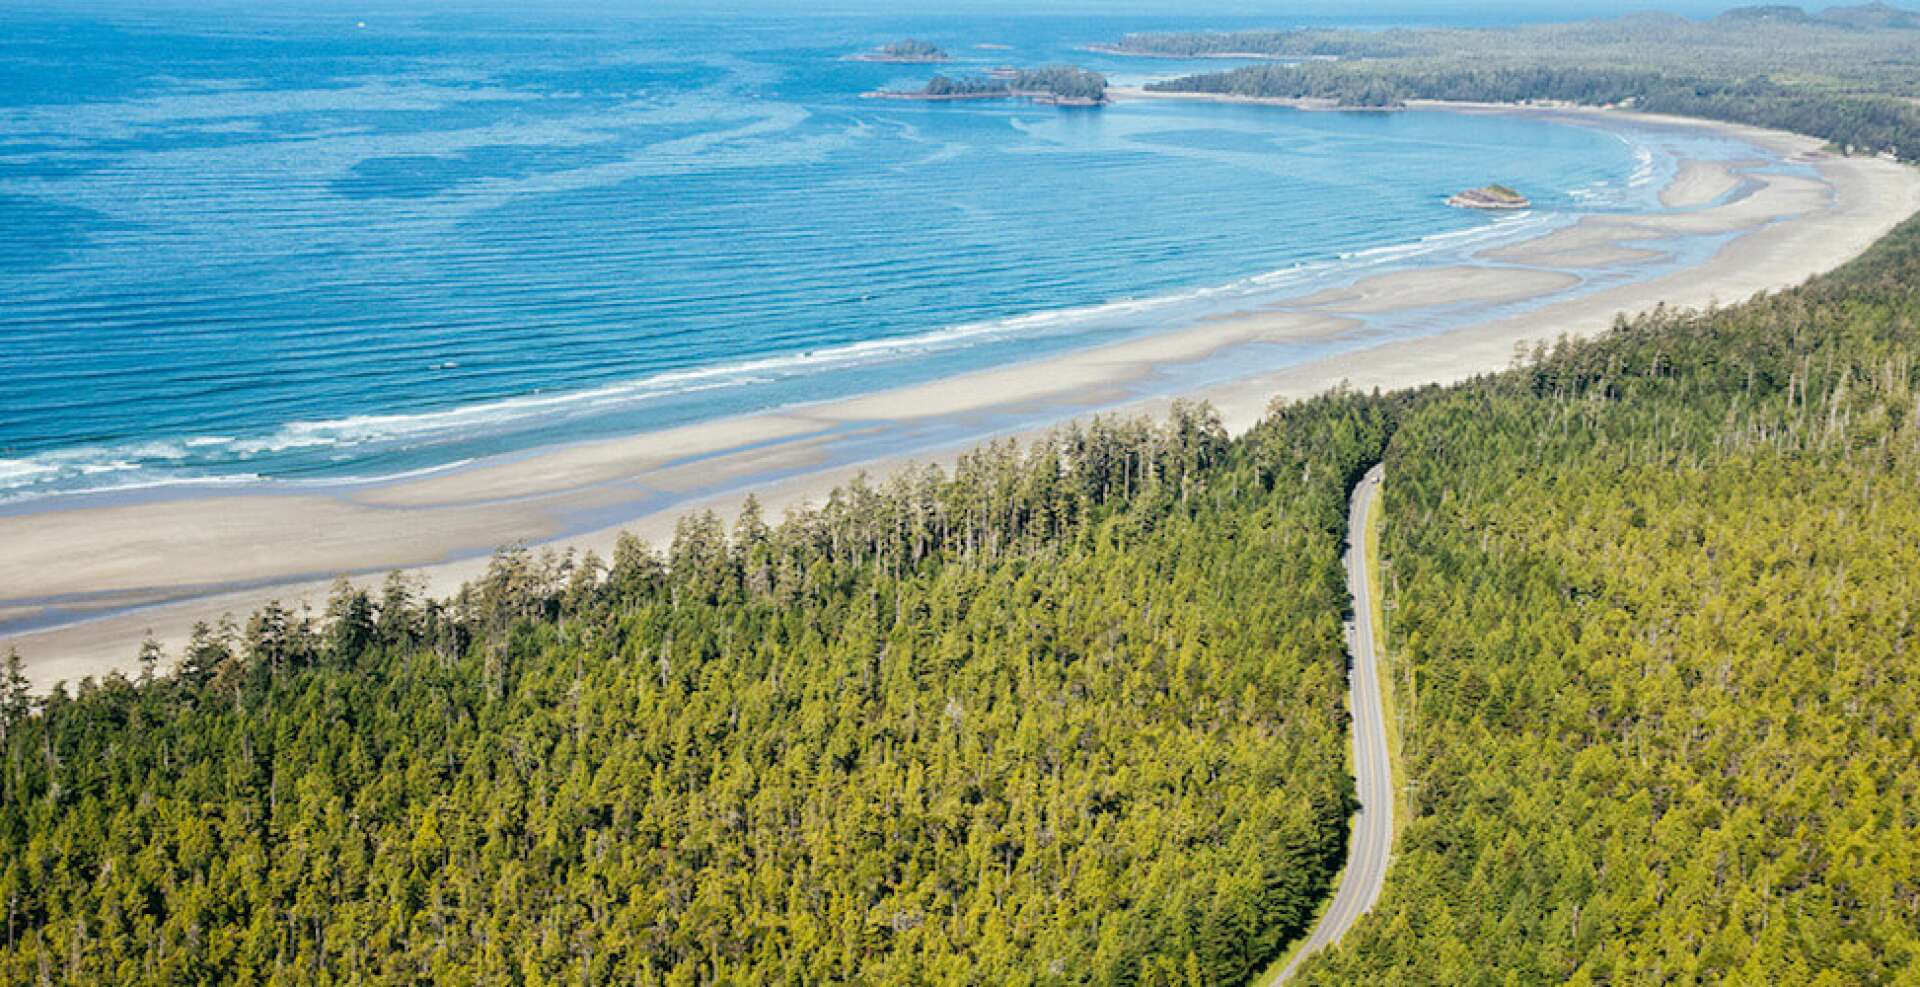 Enjoy the Journey to Tofino: 5 Stops Along the Way